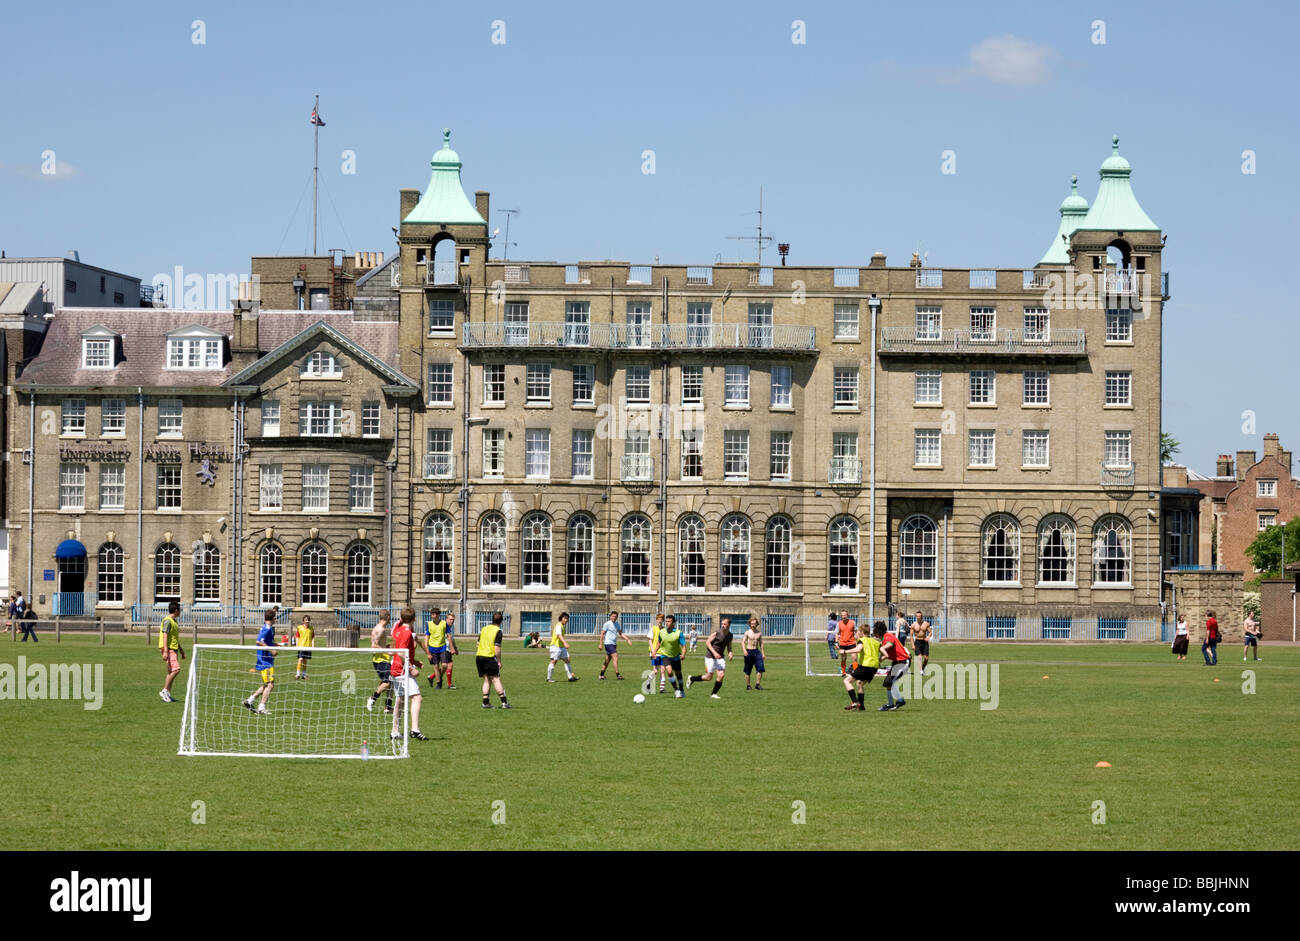 Teenagers playing football in front of the University Arms Hotel on Parkers Piece, Cambridge, UK Stock Photo